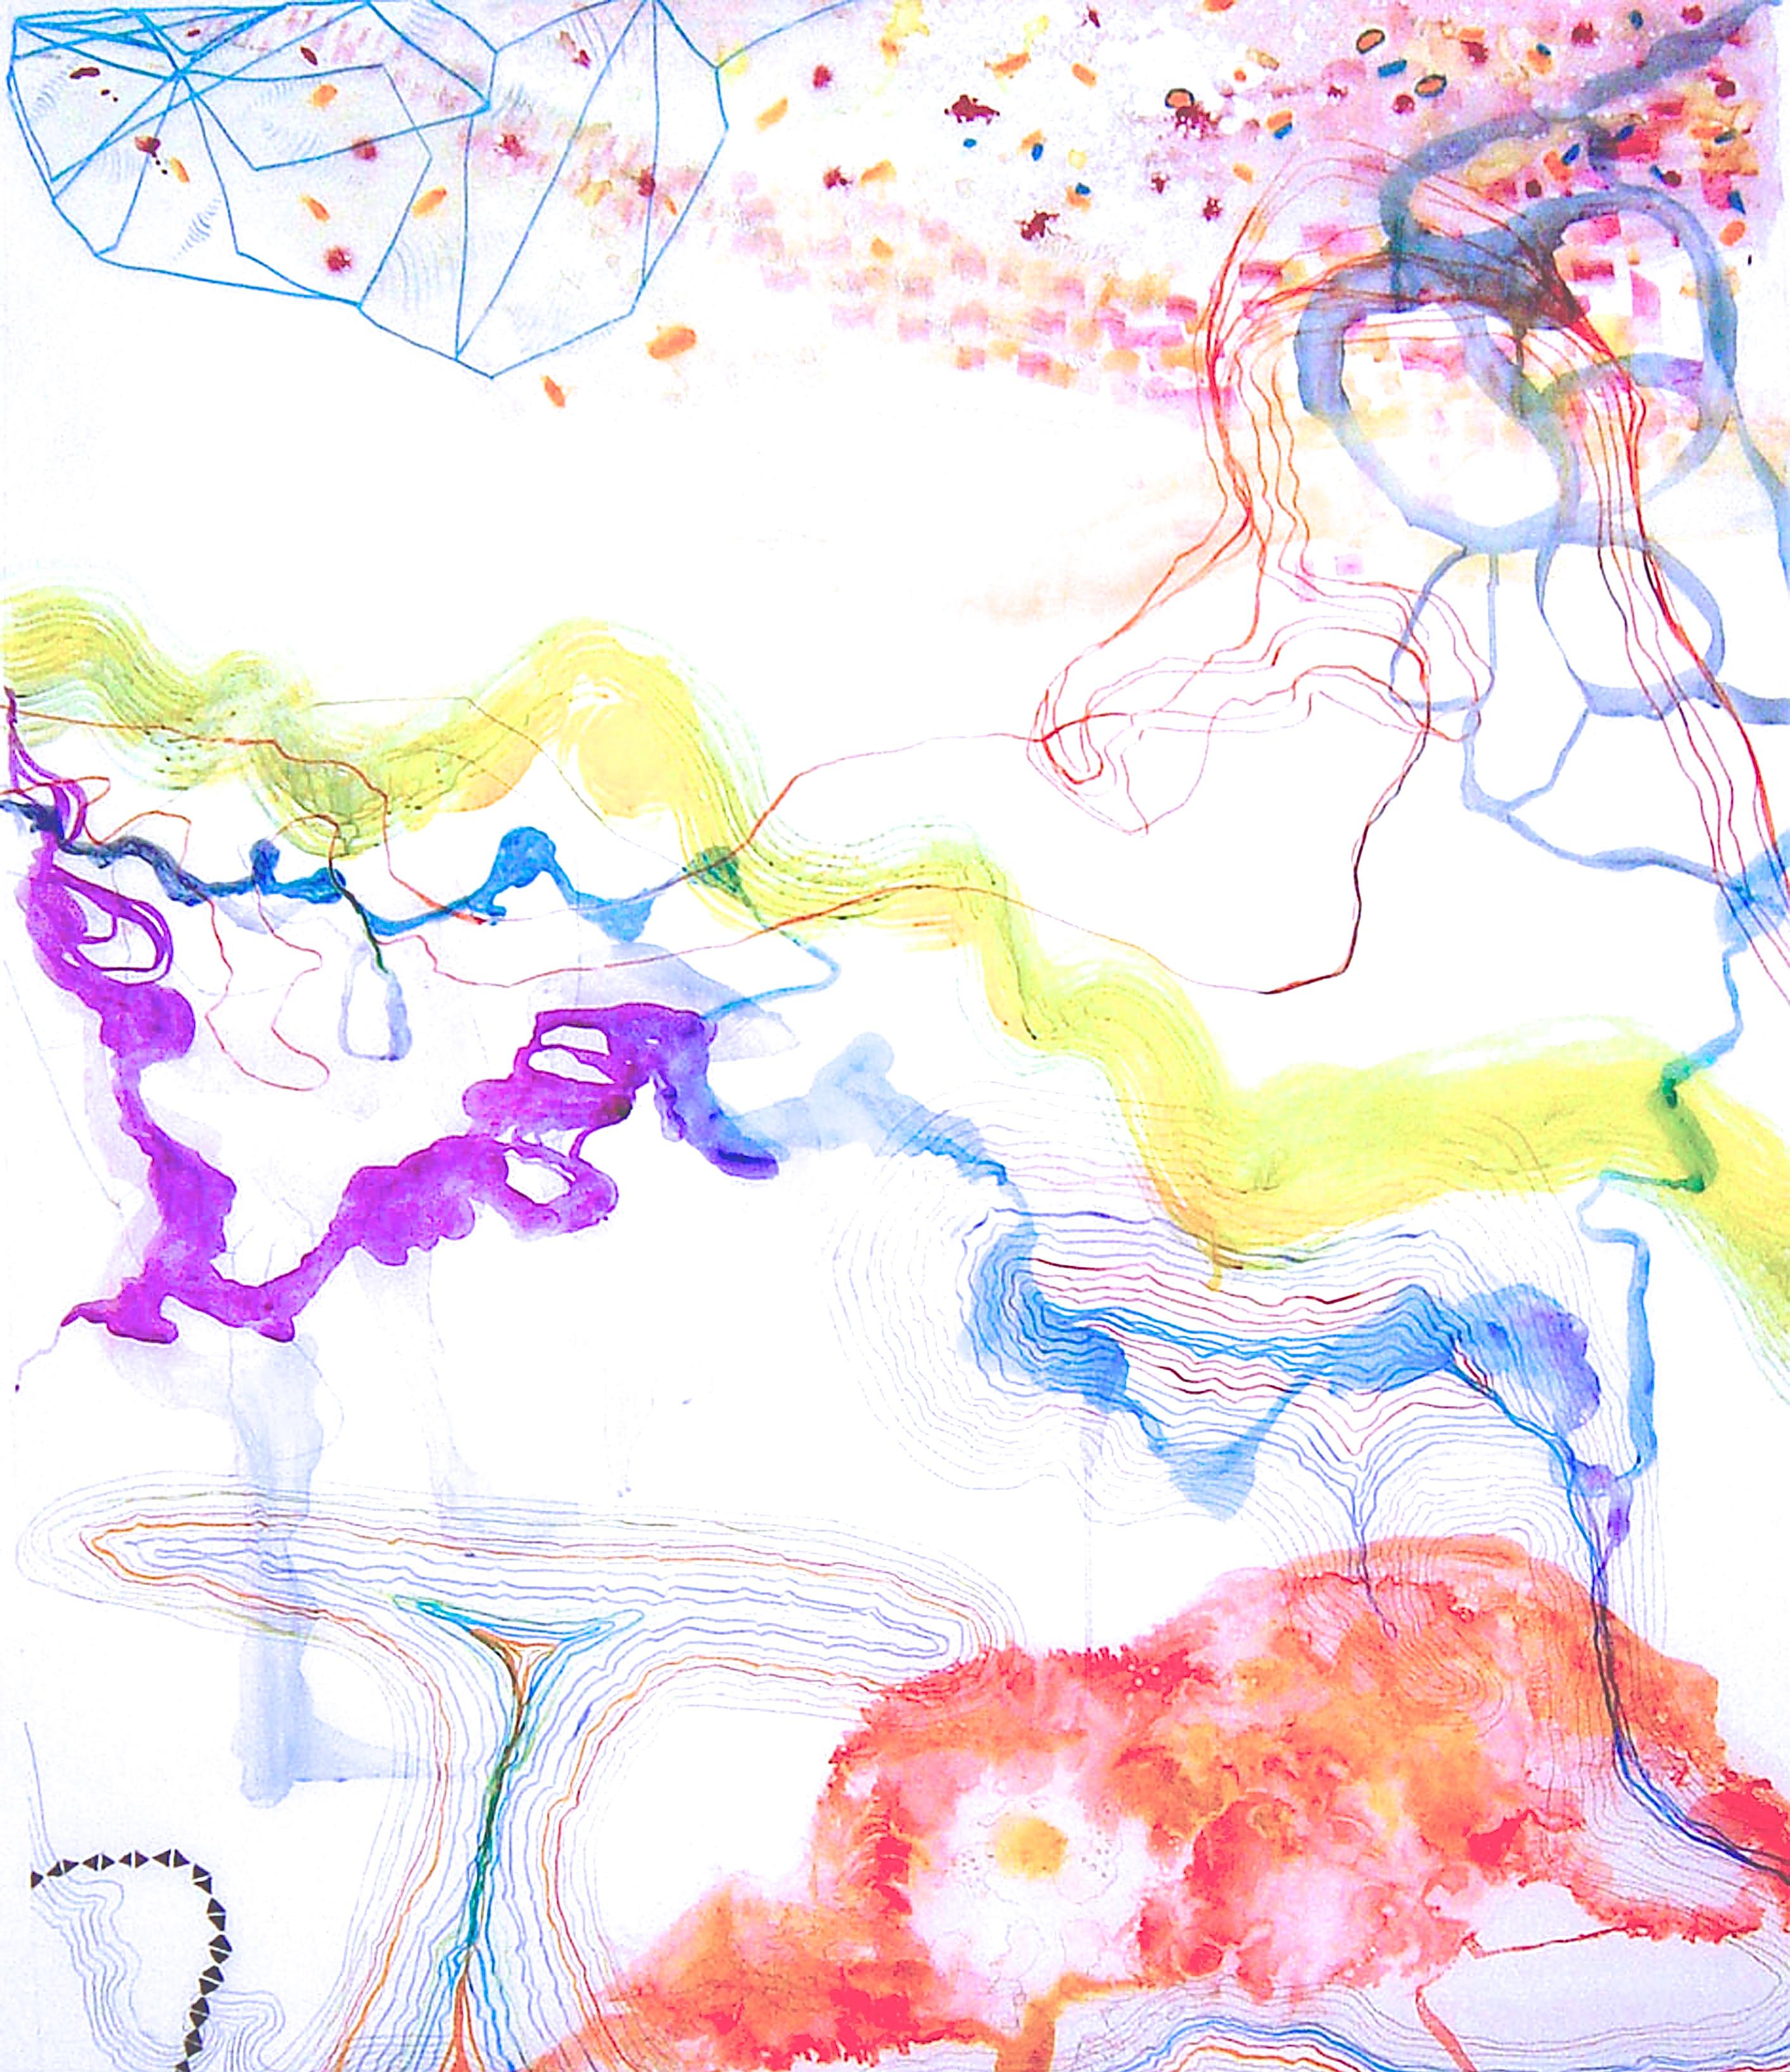 Susan Sharp Abstract Drawing - "Trace #13"  Large colorful watery abstraction yellow, purple, blue, red, purple